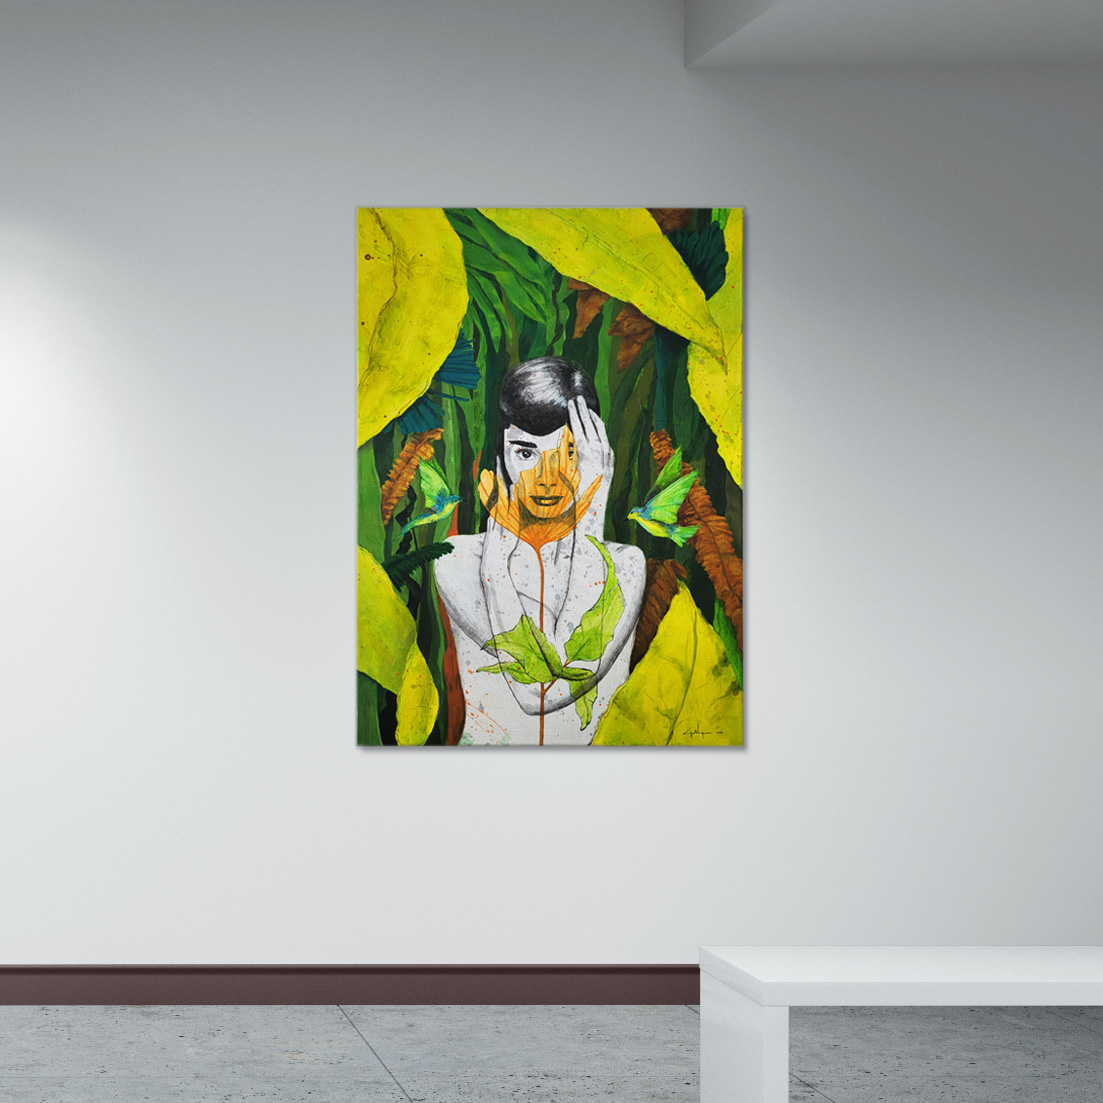 The painting 'Audrey' in the gallery